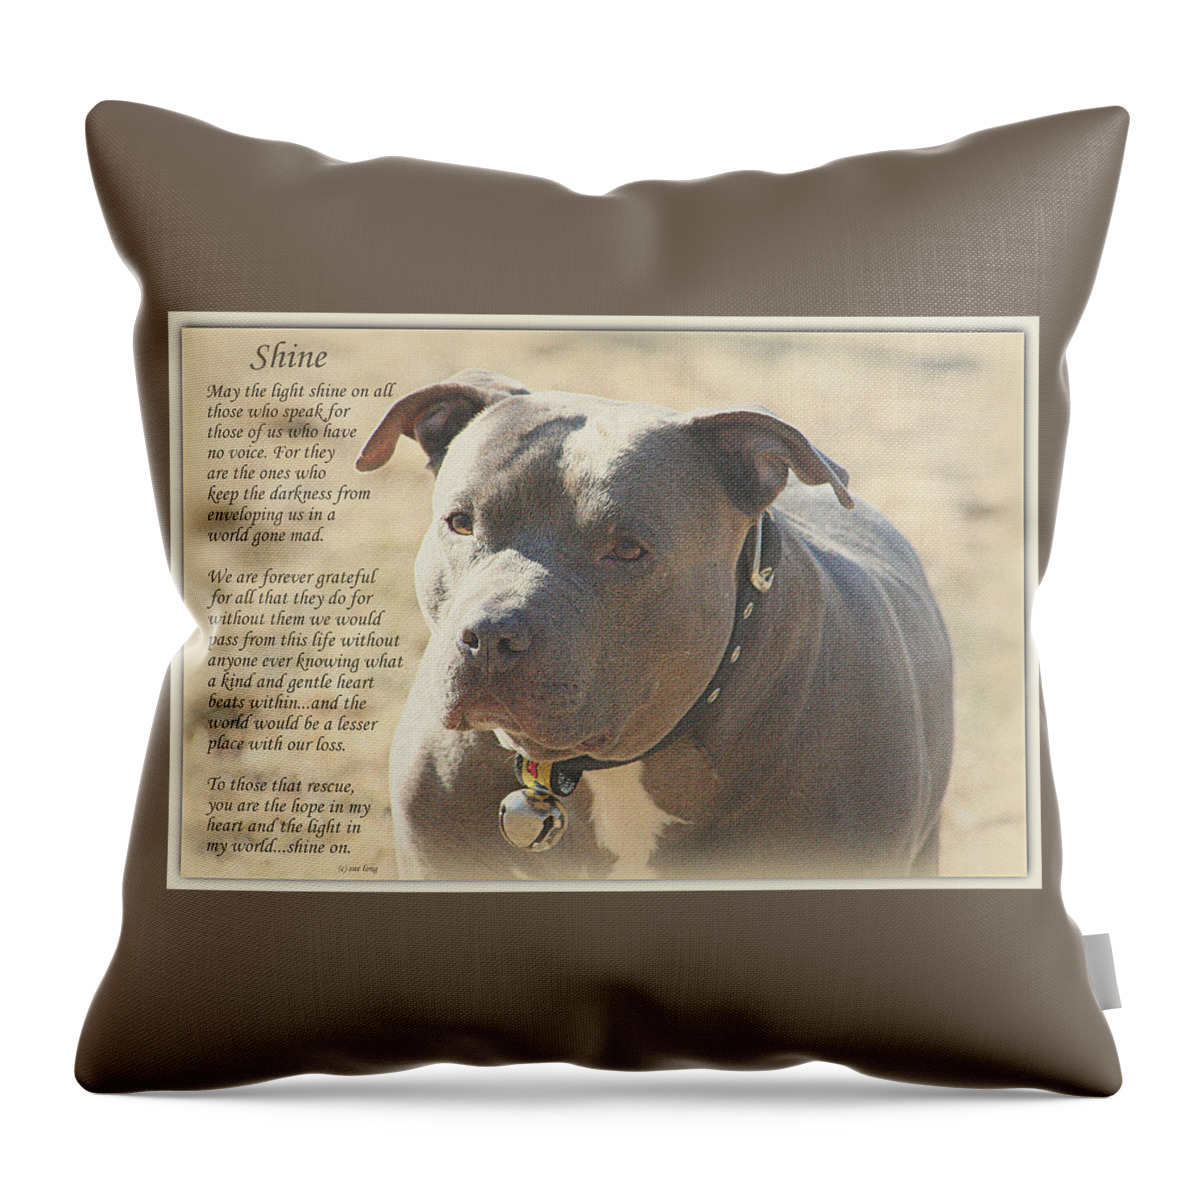 Quote Throw Pillow featuring the photograph Shine by Sue Long